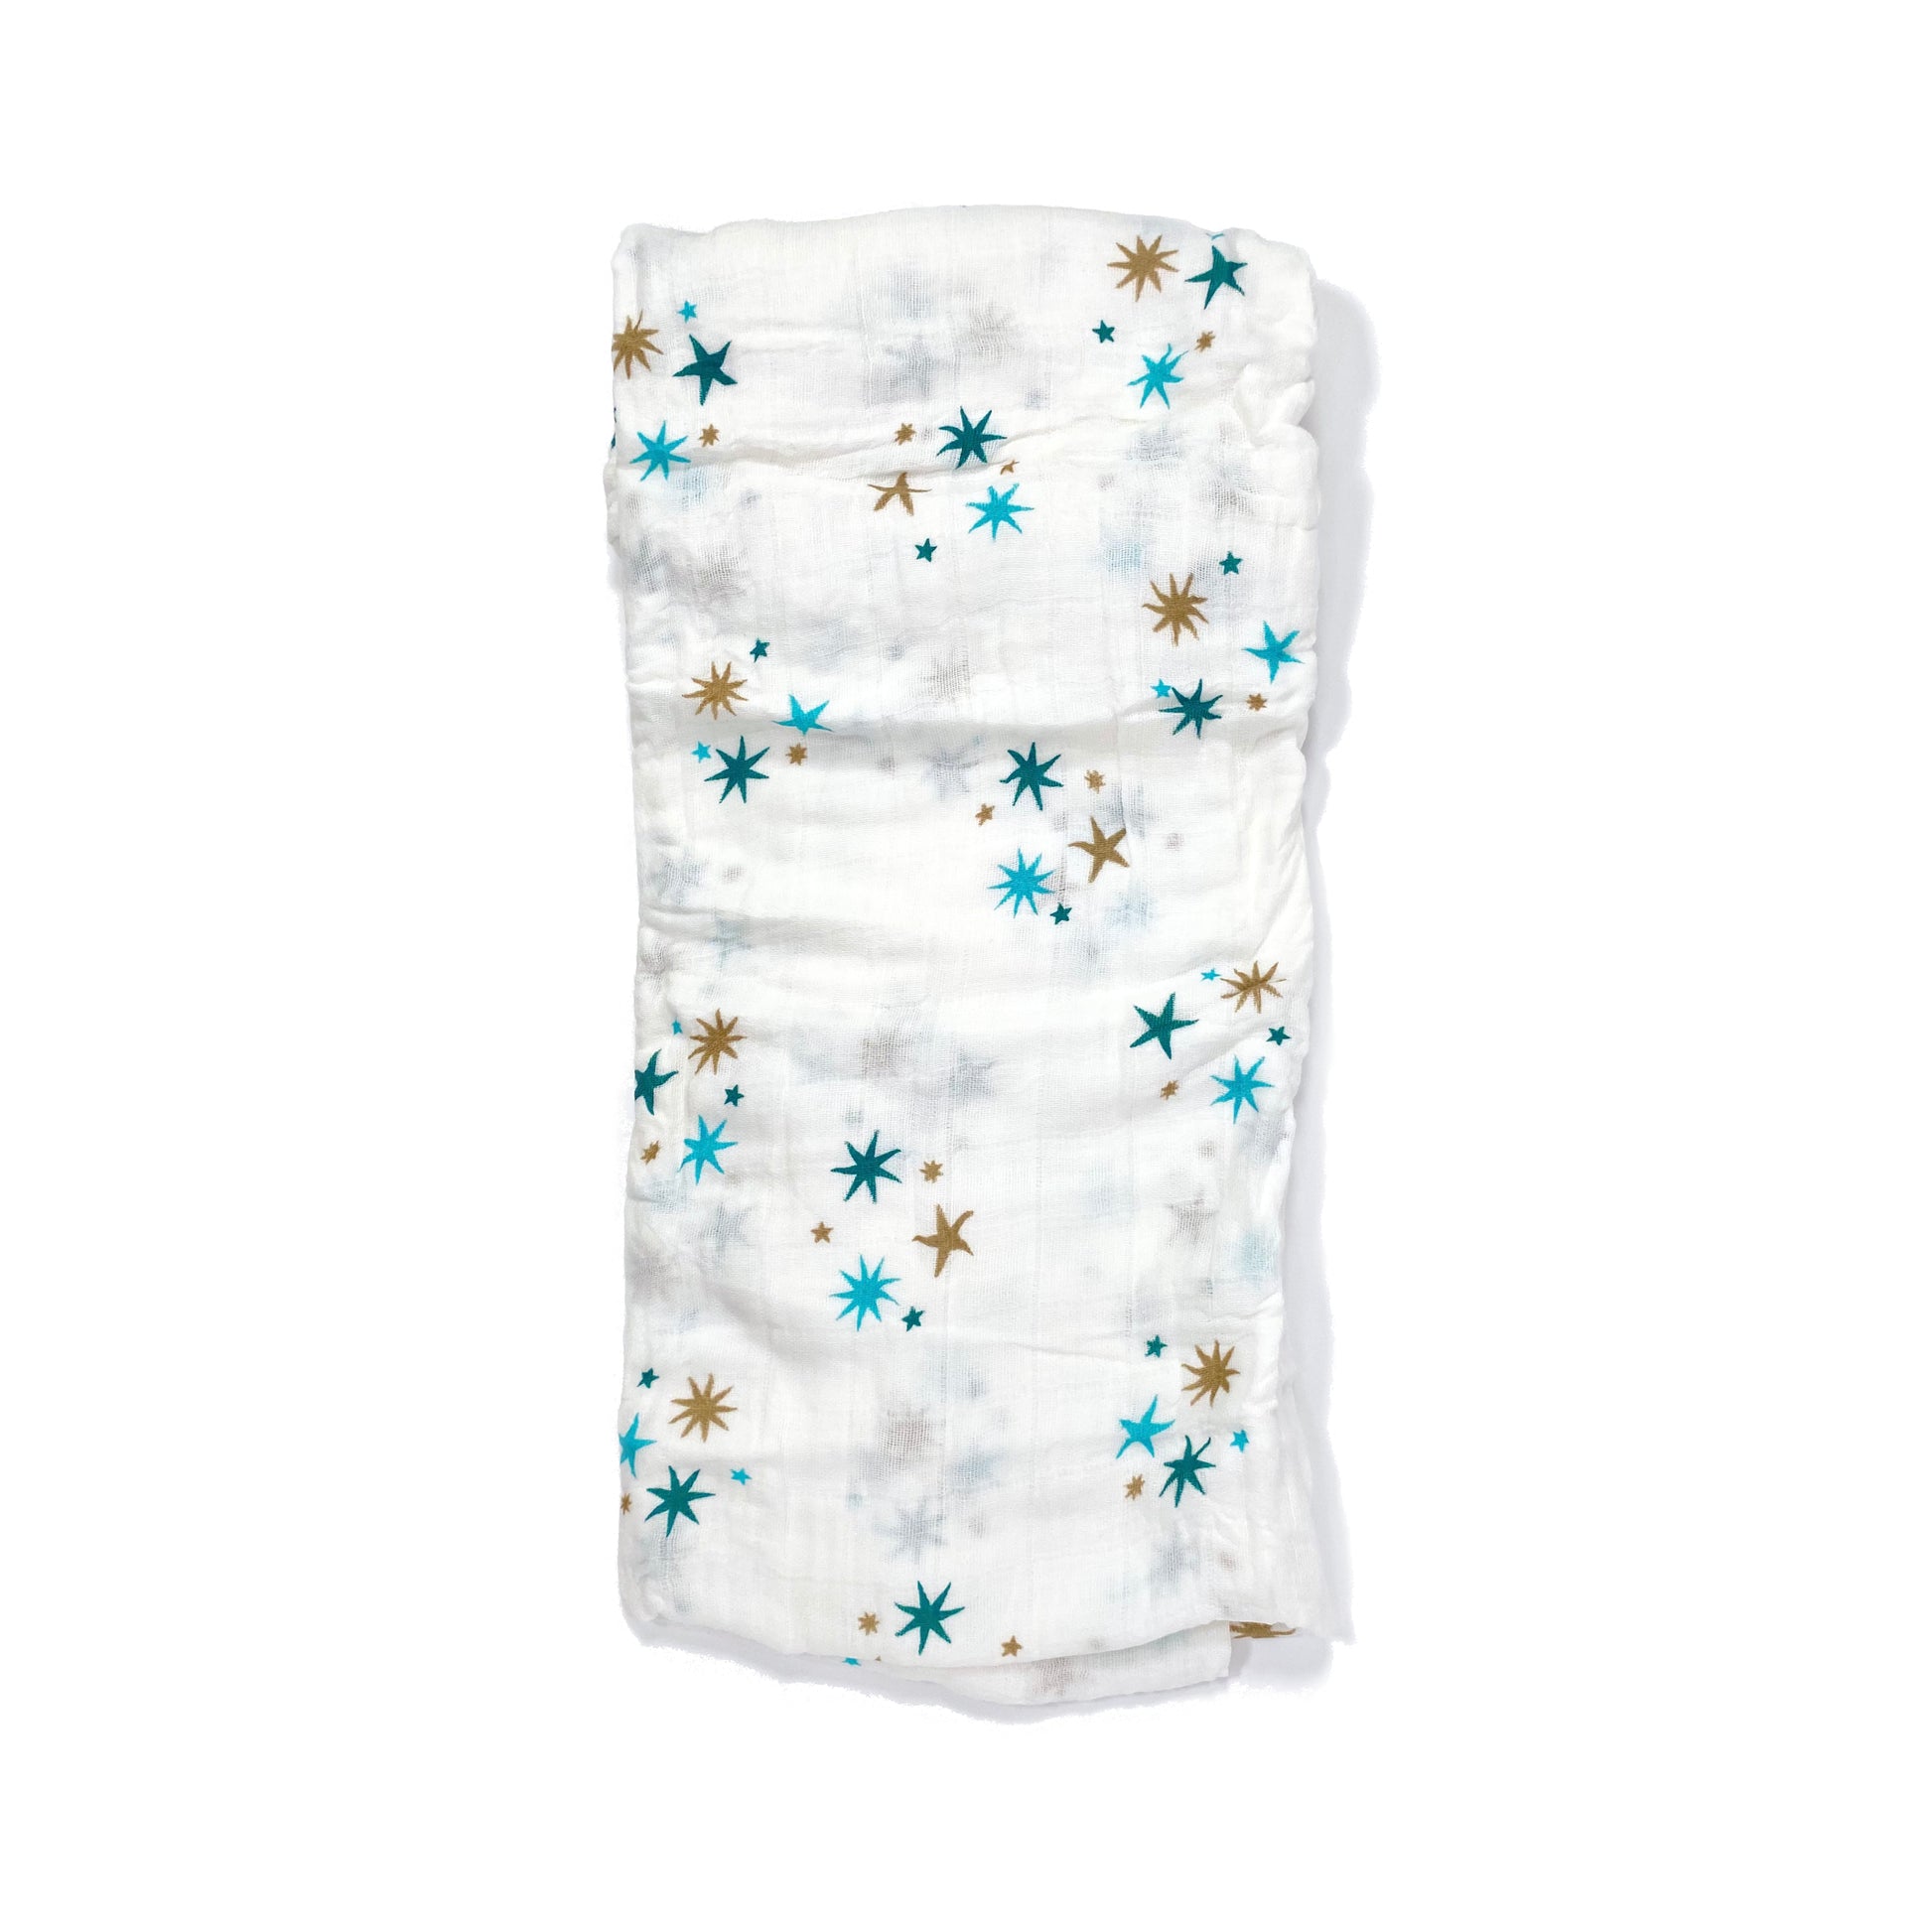 A folded muslin swaddle blanket with a blue stars design.